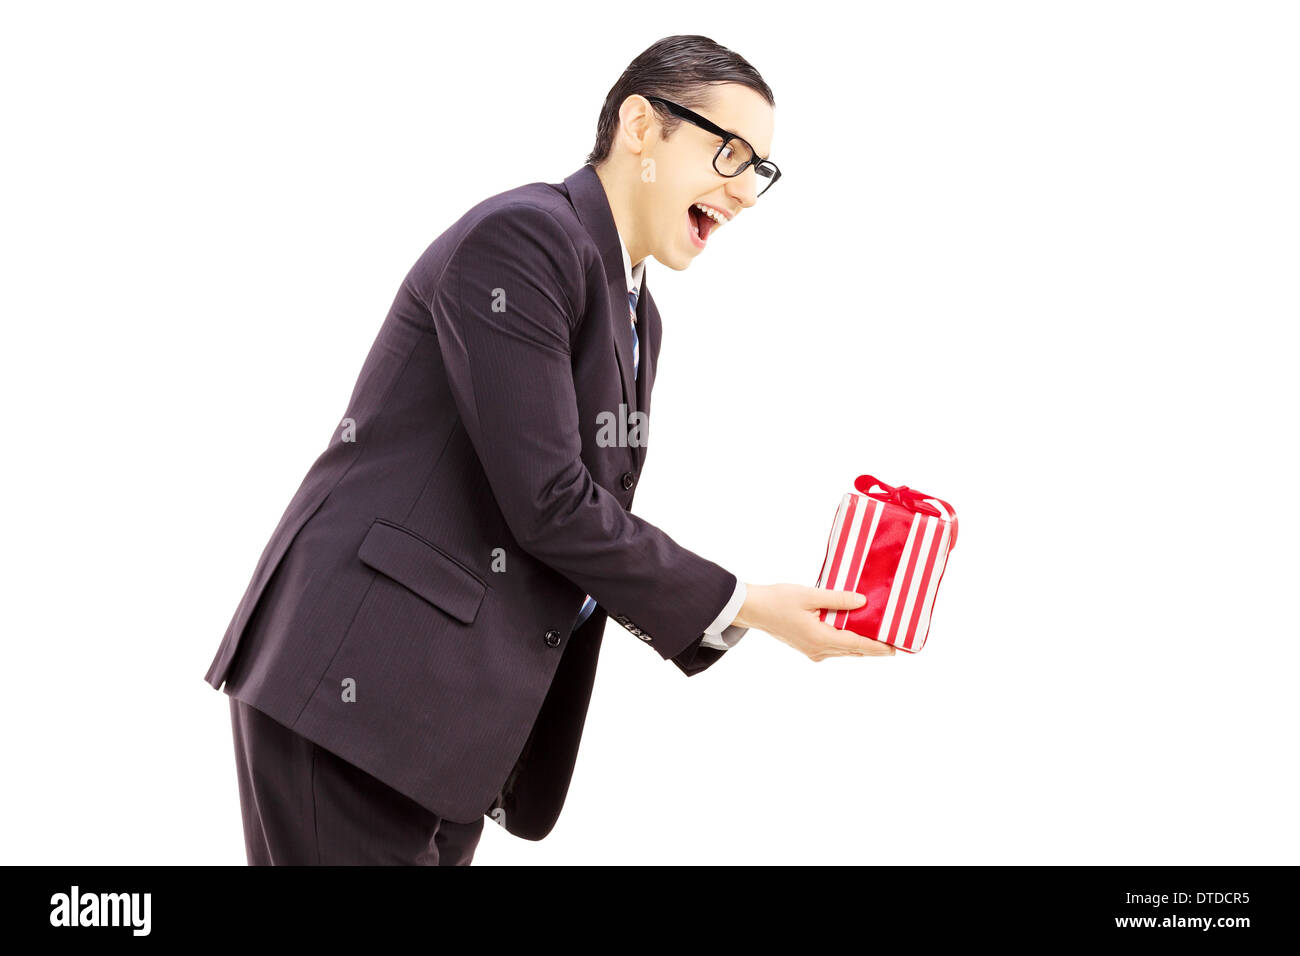 Excited young man in black suit giving a present Stock Photo